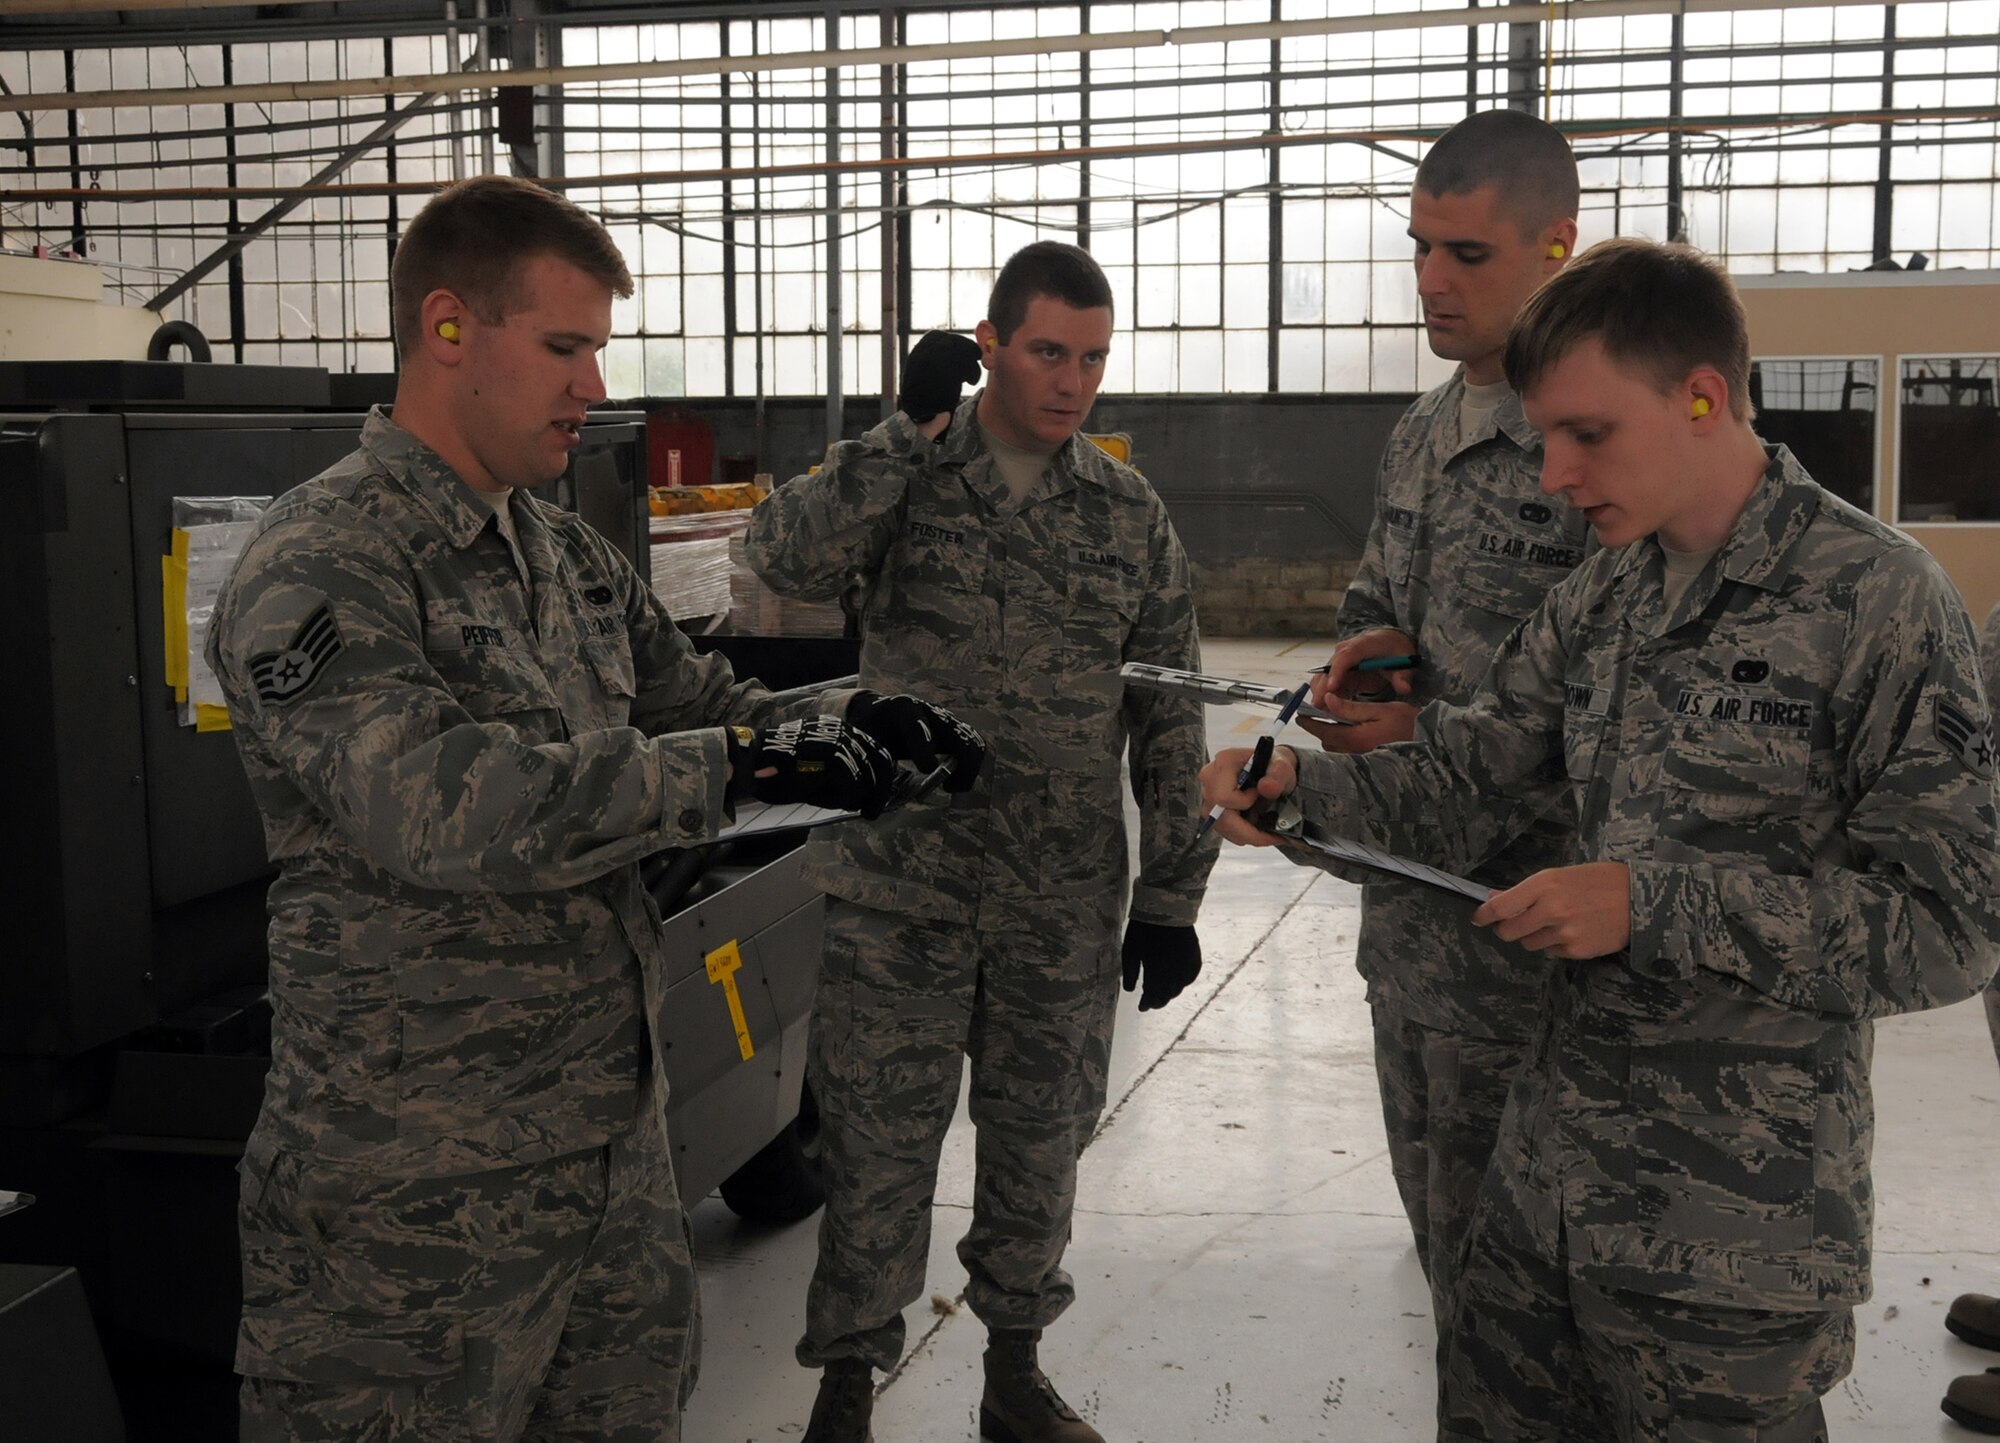 WRIGHT-PATTERSON AIR FORCE BASE, Ohio – 87th Aerial Port Squadron reservists Staff Sgt. Alexander Peiffer, Tech. Sgt. Matthew Foster (training facilitator), Staff Sgt. Eric Wadlington and  Senior Airman Corey Brown. review data collected during pallet building training during the July 19, 2014, unit training assembly. (U.S. Air Force photo/Tech. Sgt. Anthony G. Springer)